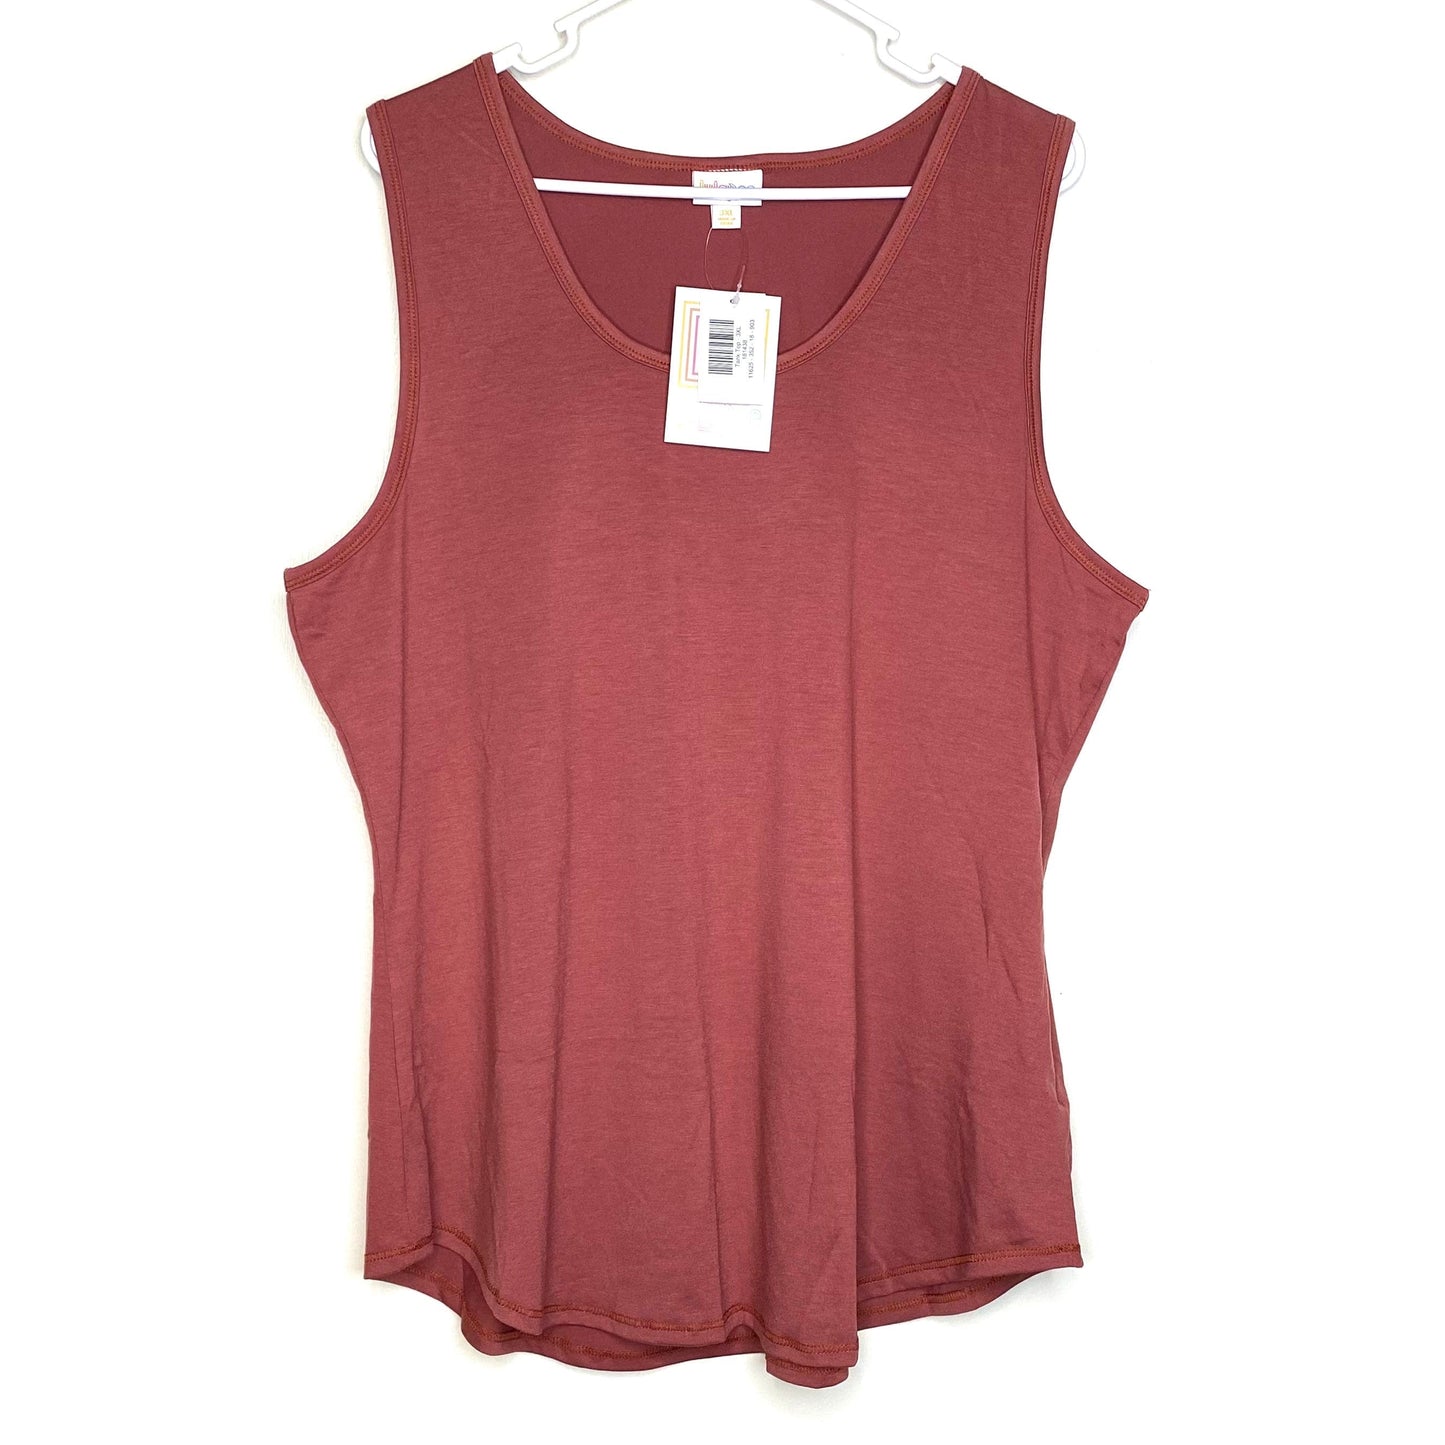 LuLaRoe | Solid Sleeveless Tank Top Shirt | Color: Wine Pink | Size: 3XL | NWT